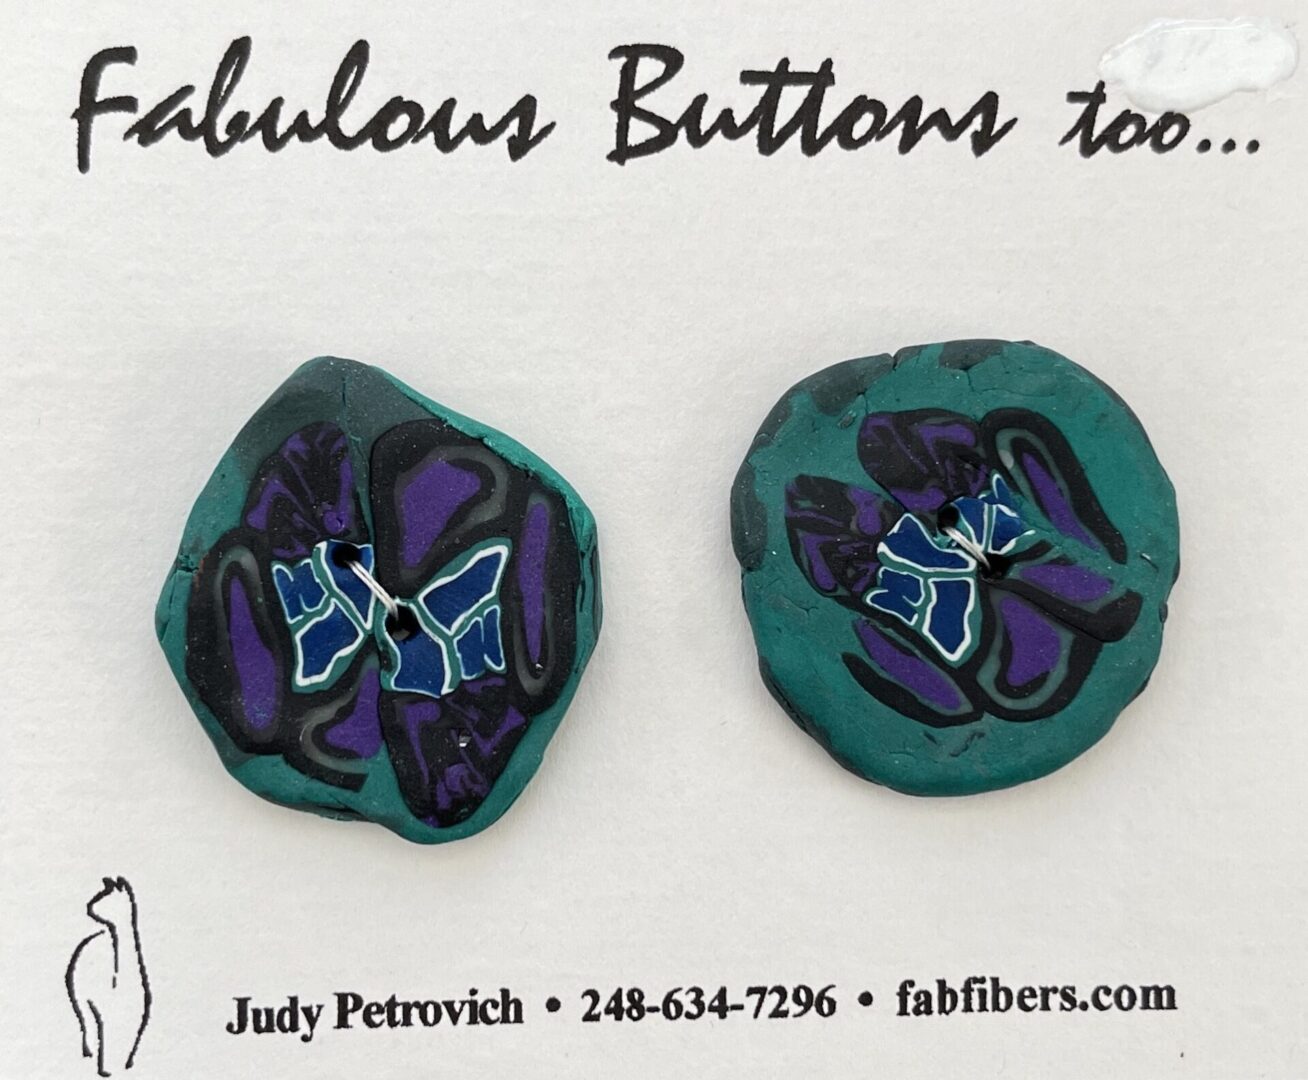 A pair of buttons with purple and blue flowers on them.